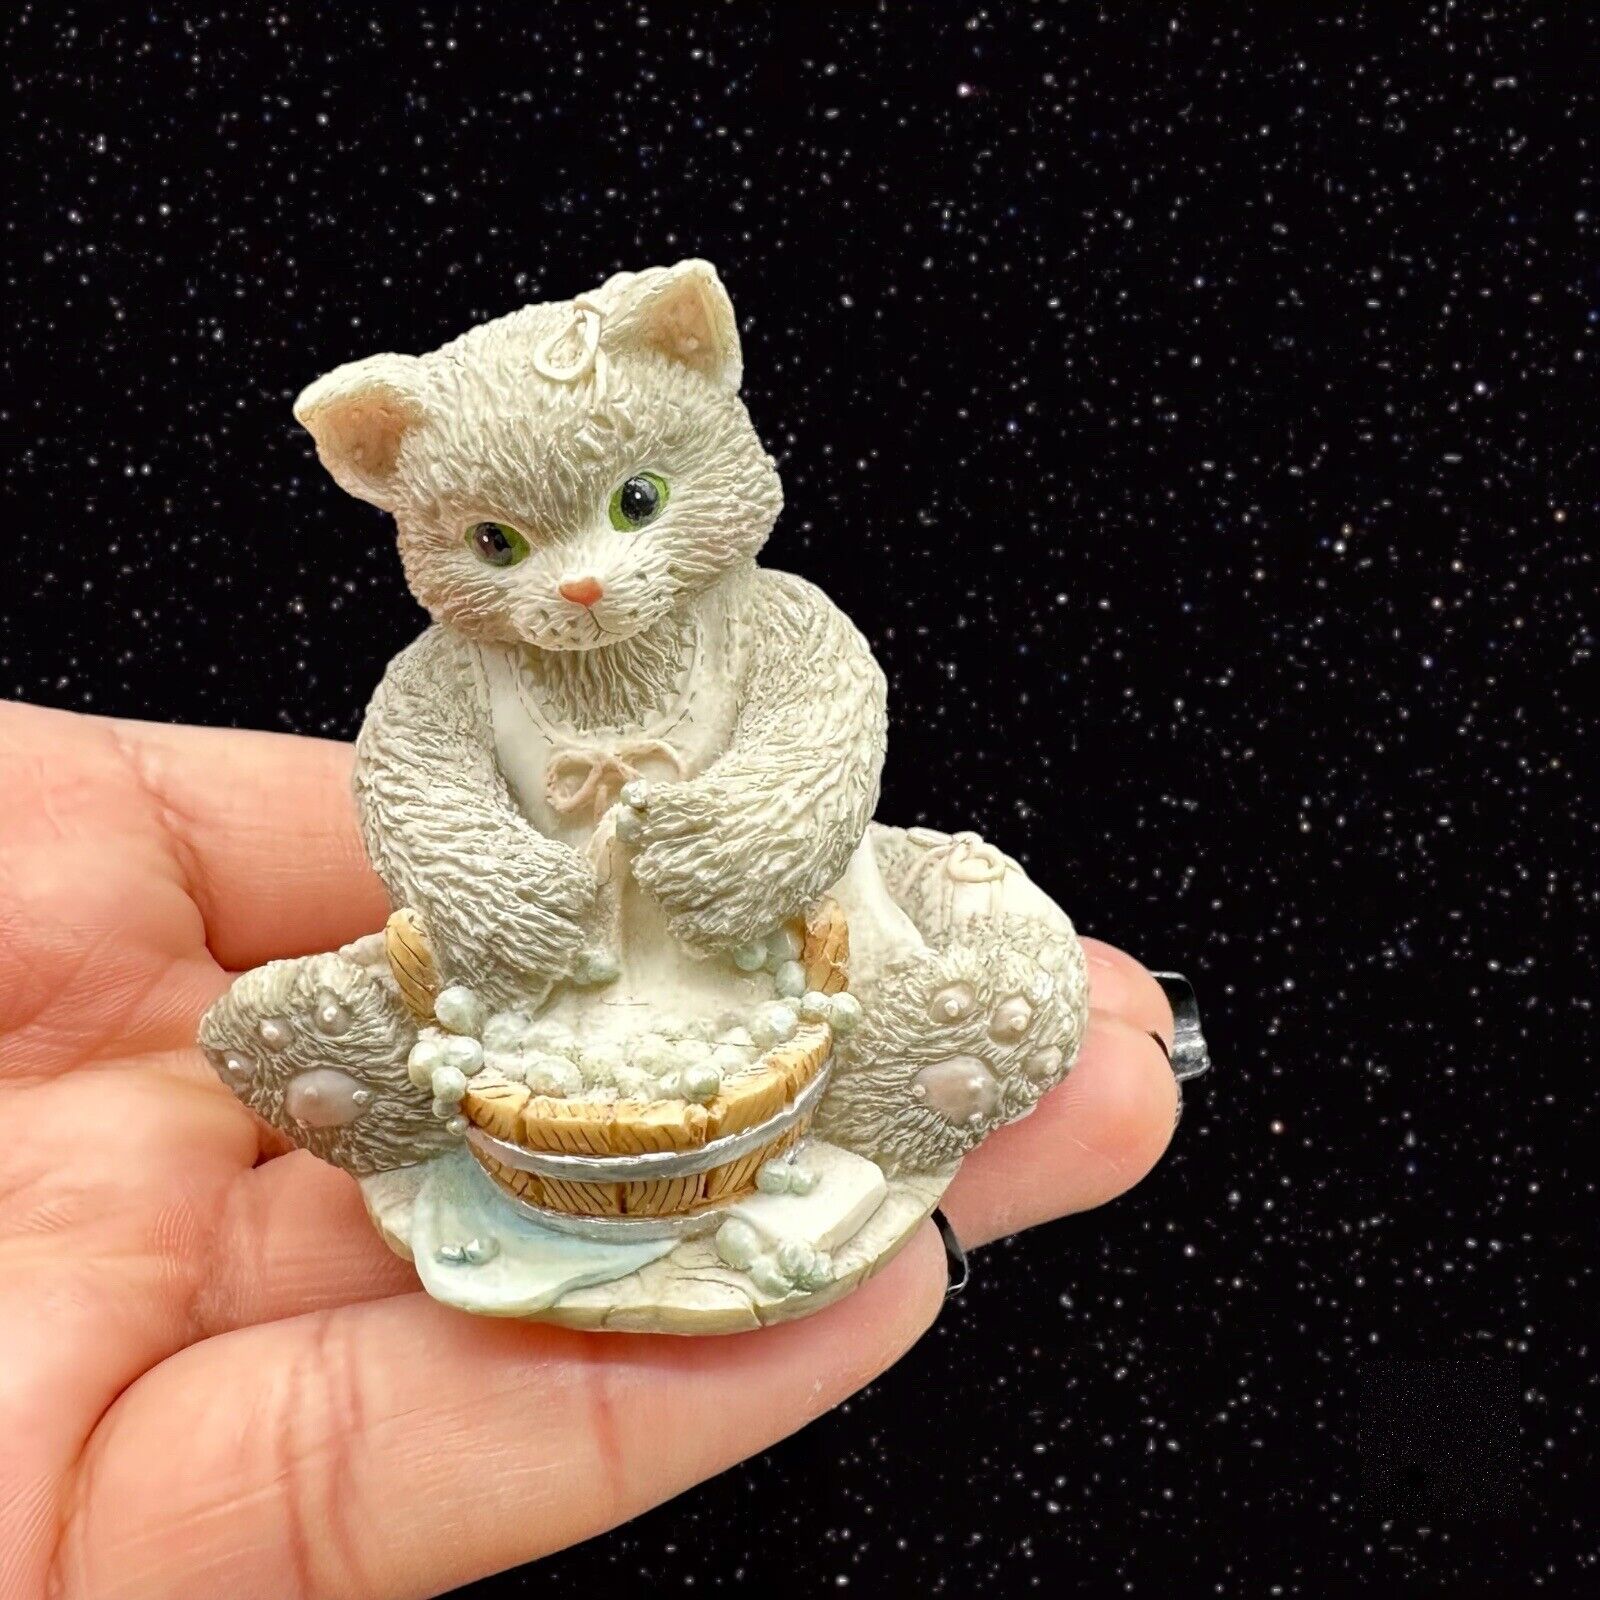 Calico Kittens Figurine Good As N Cleanliness 1994 Priscilla Hillman 2.5”T